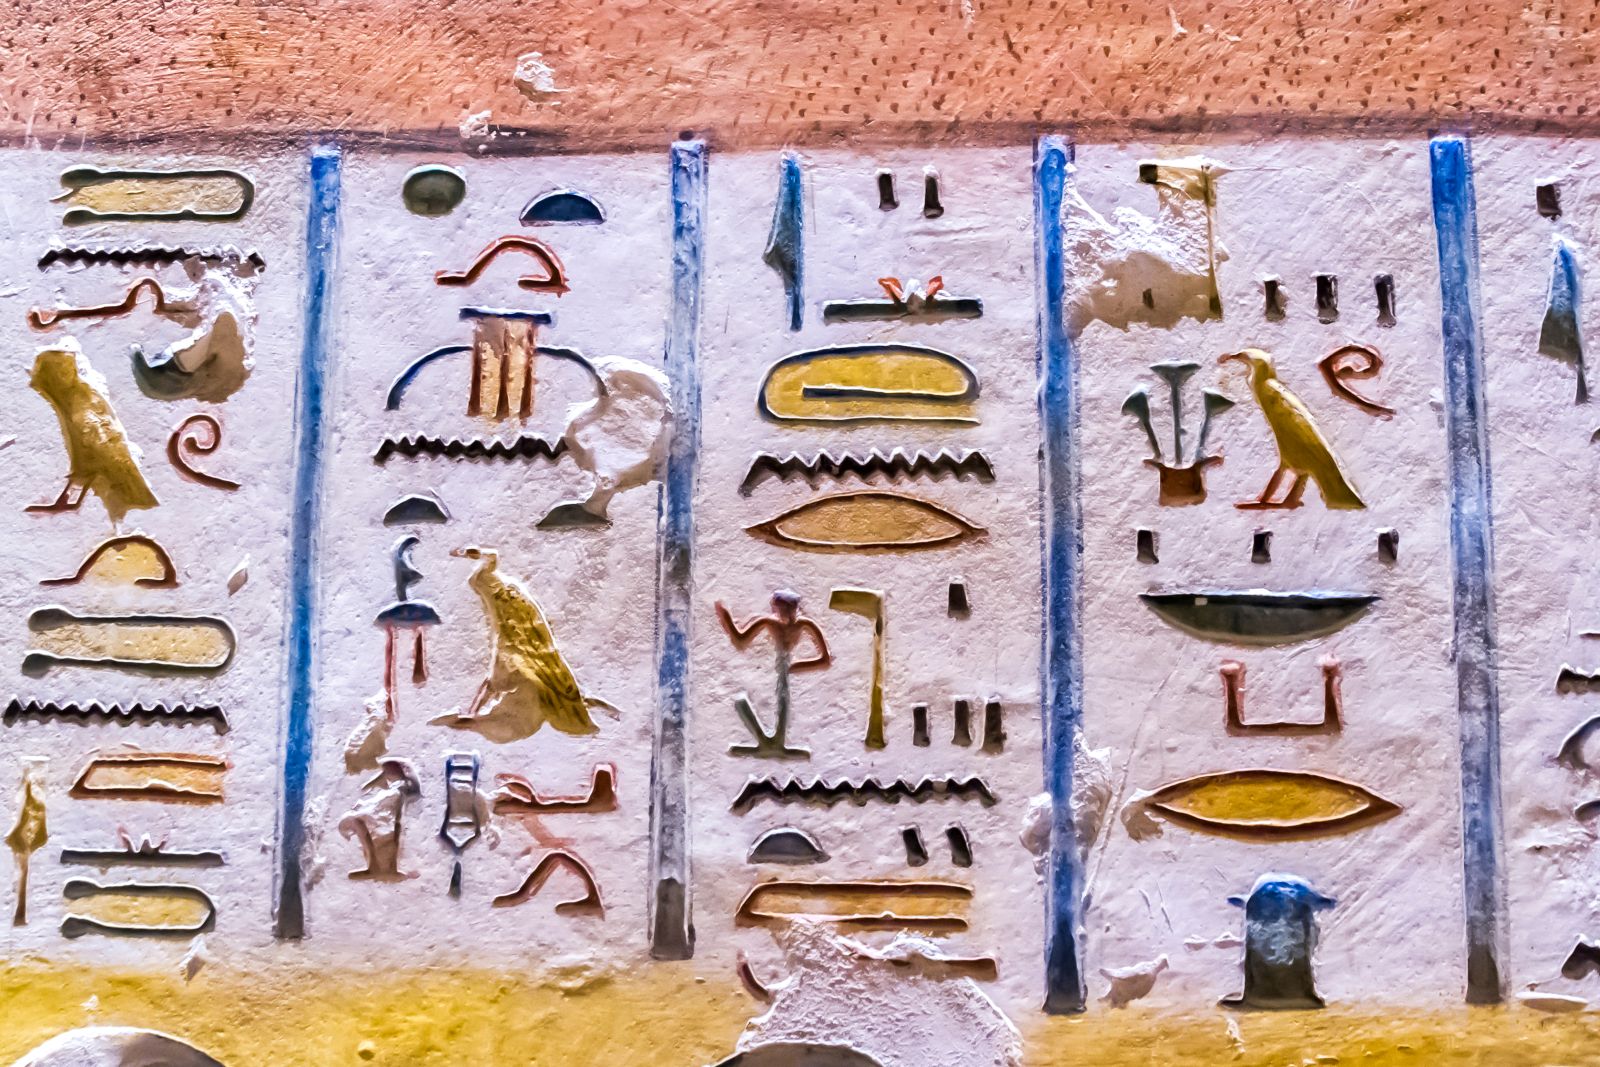 Detail of intricate hieroglyphics in Egypt's Valley of the Kings